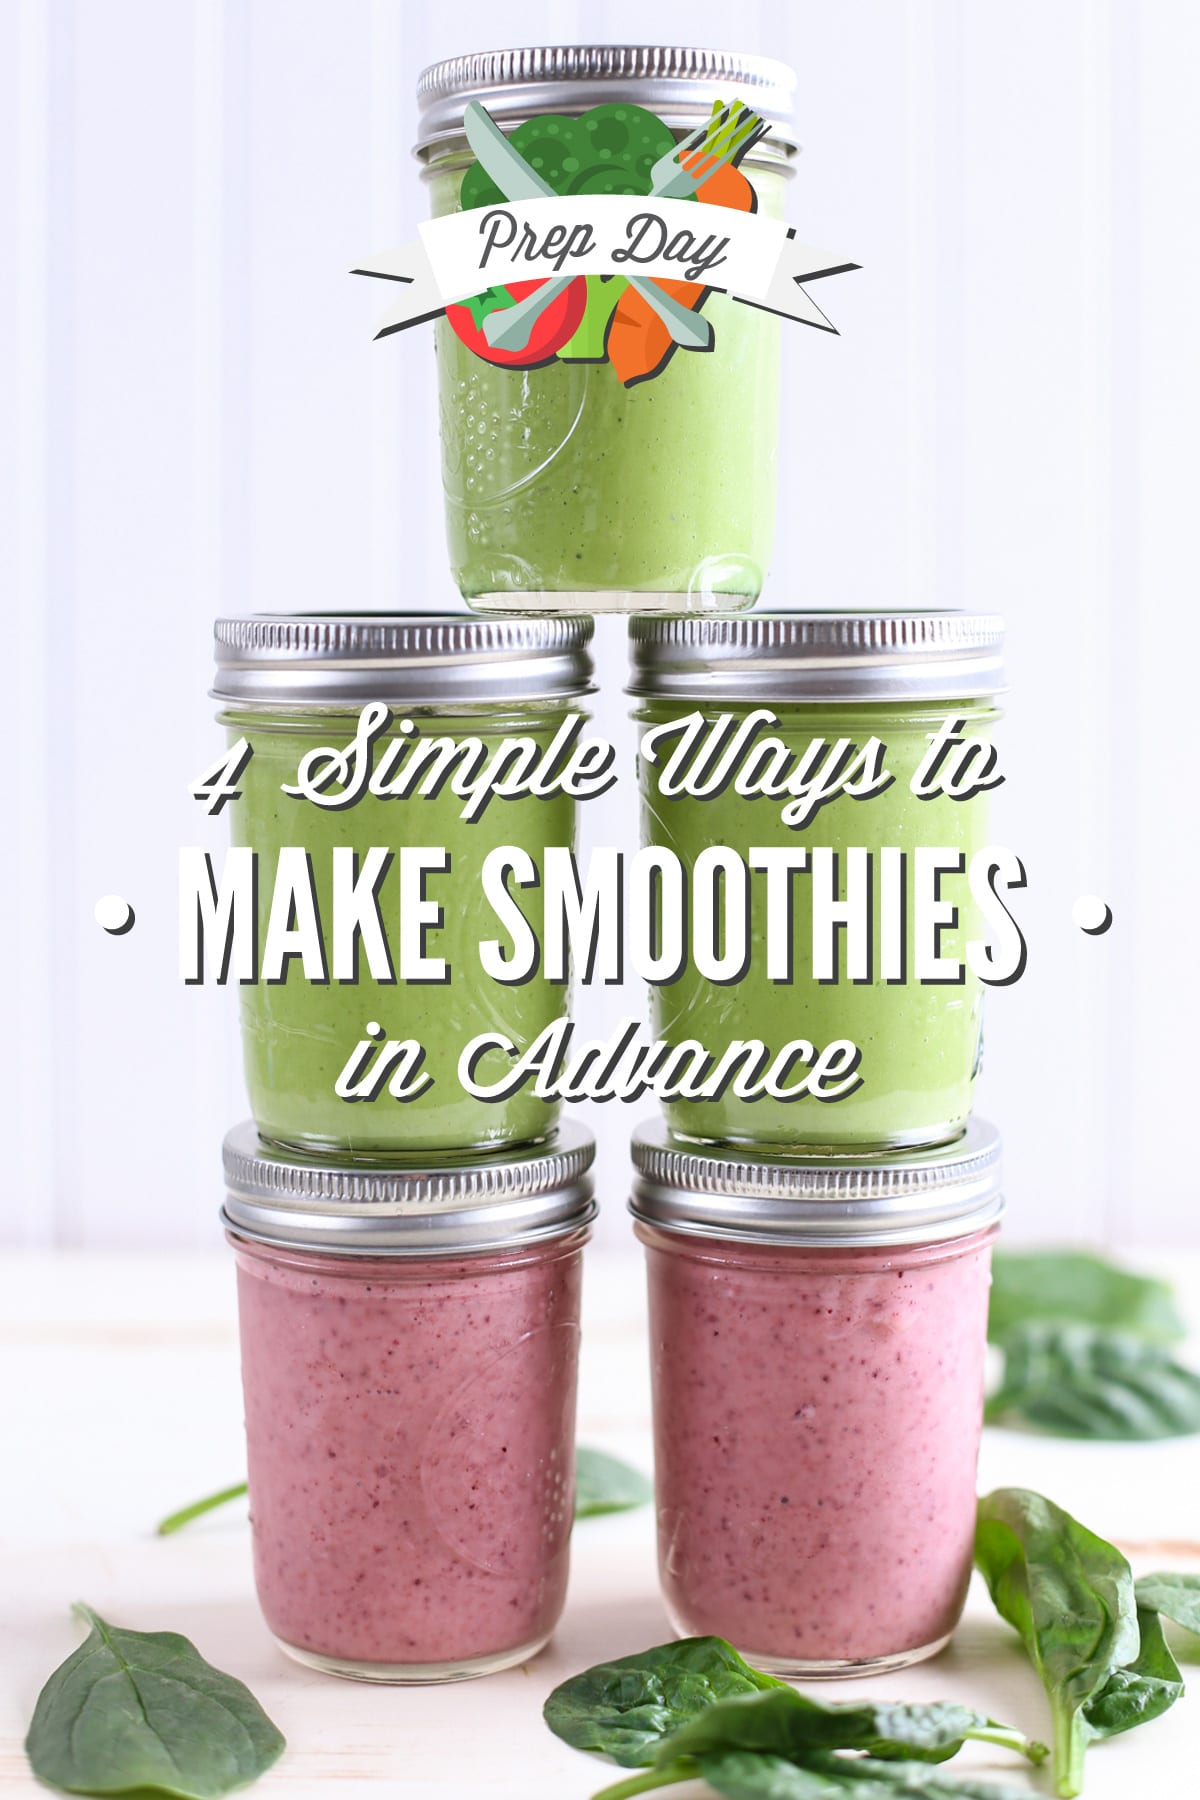 Four super easy ways to always have smoothies stocked without taking out the blender every single day.